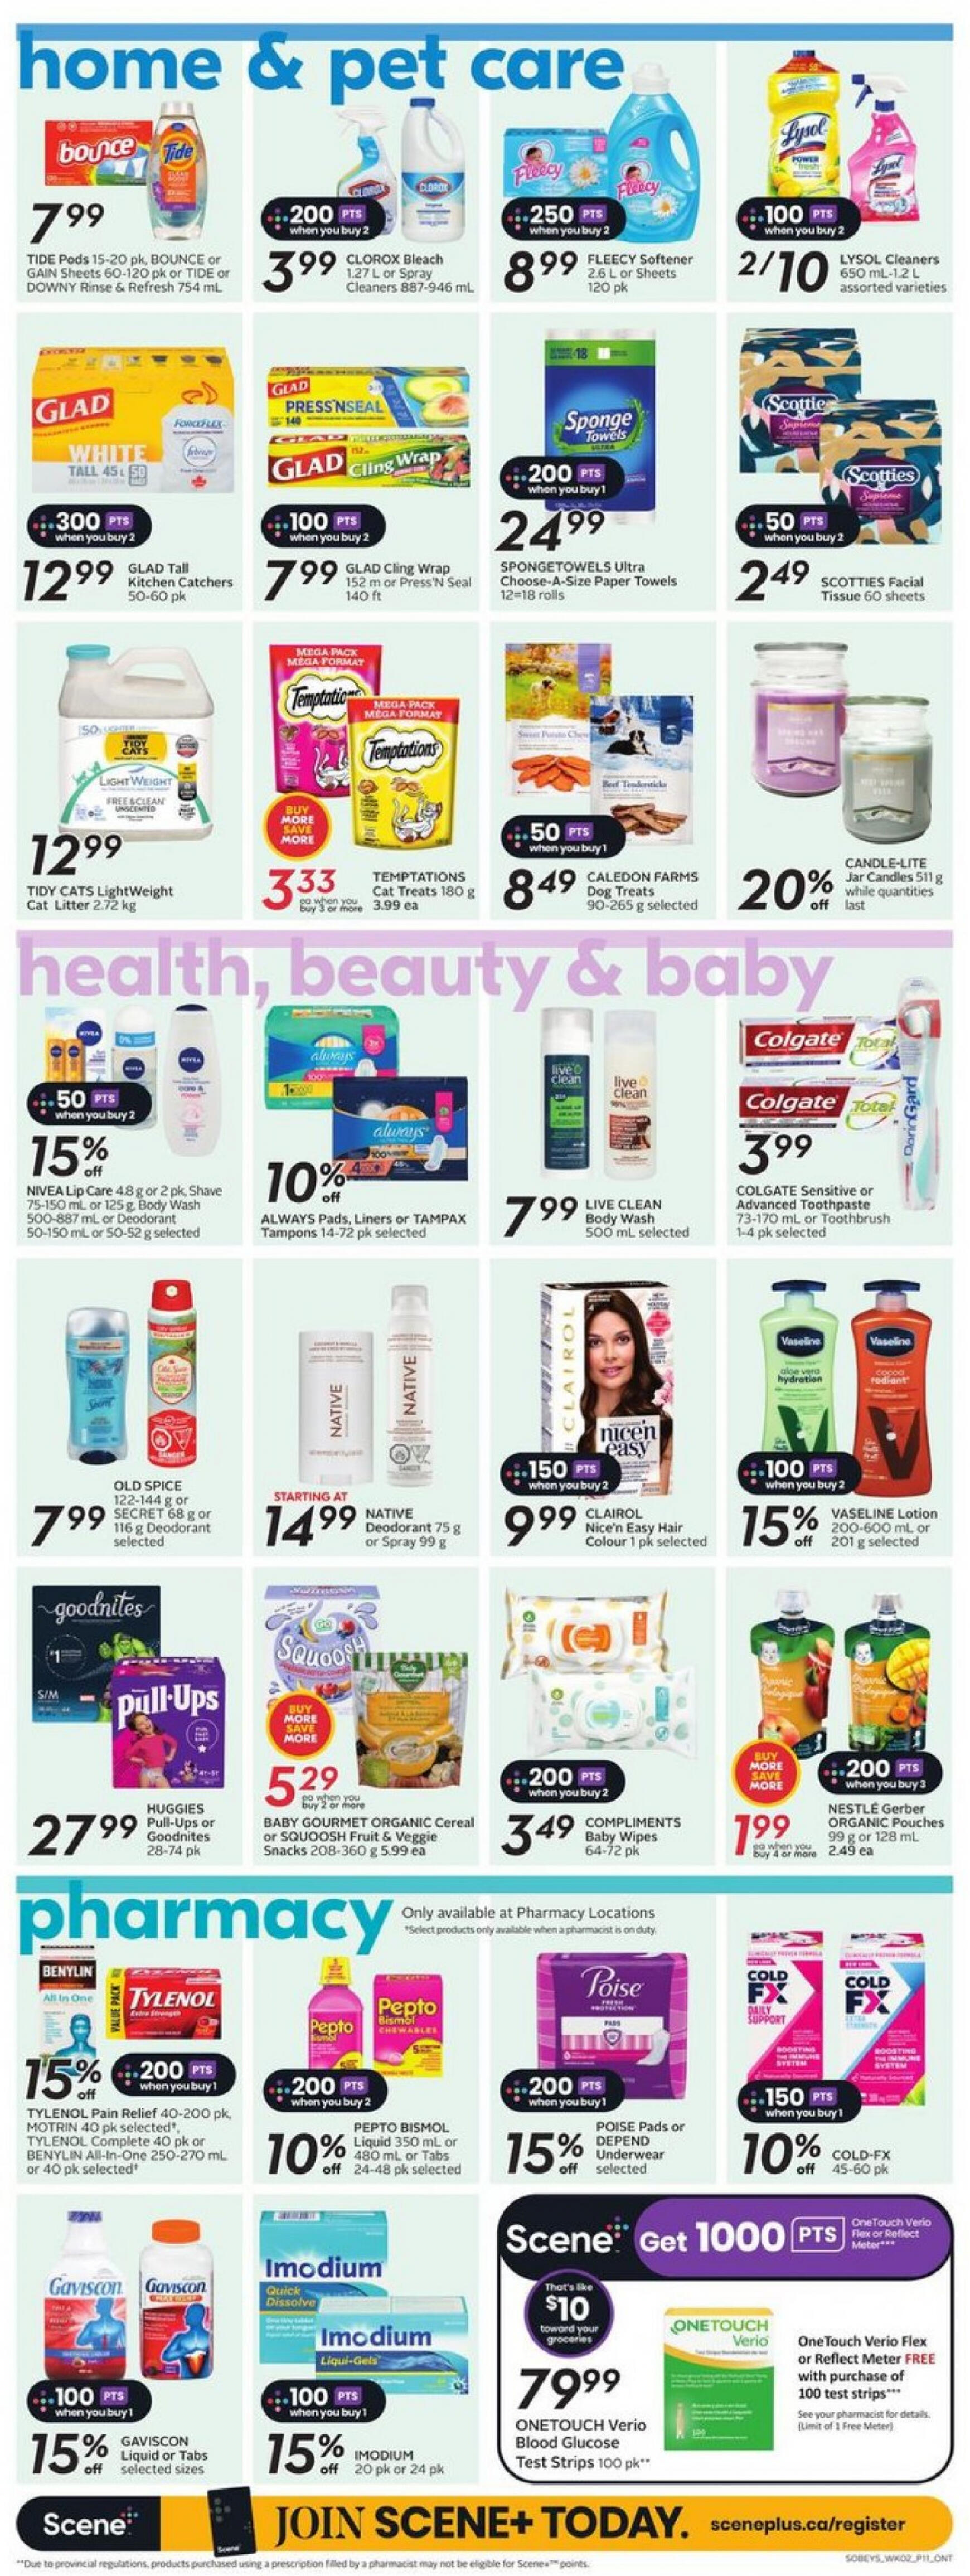 sobeys - Sobeys - Weekly Flyer - Ontario flyer current 09.05. - 15.05. - page: 20